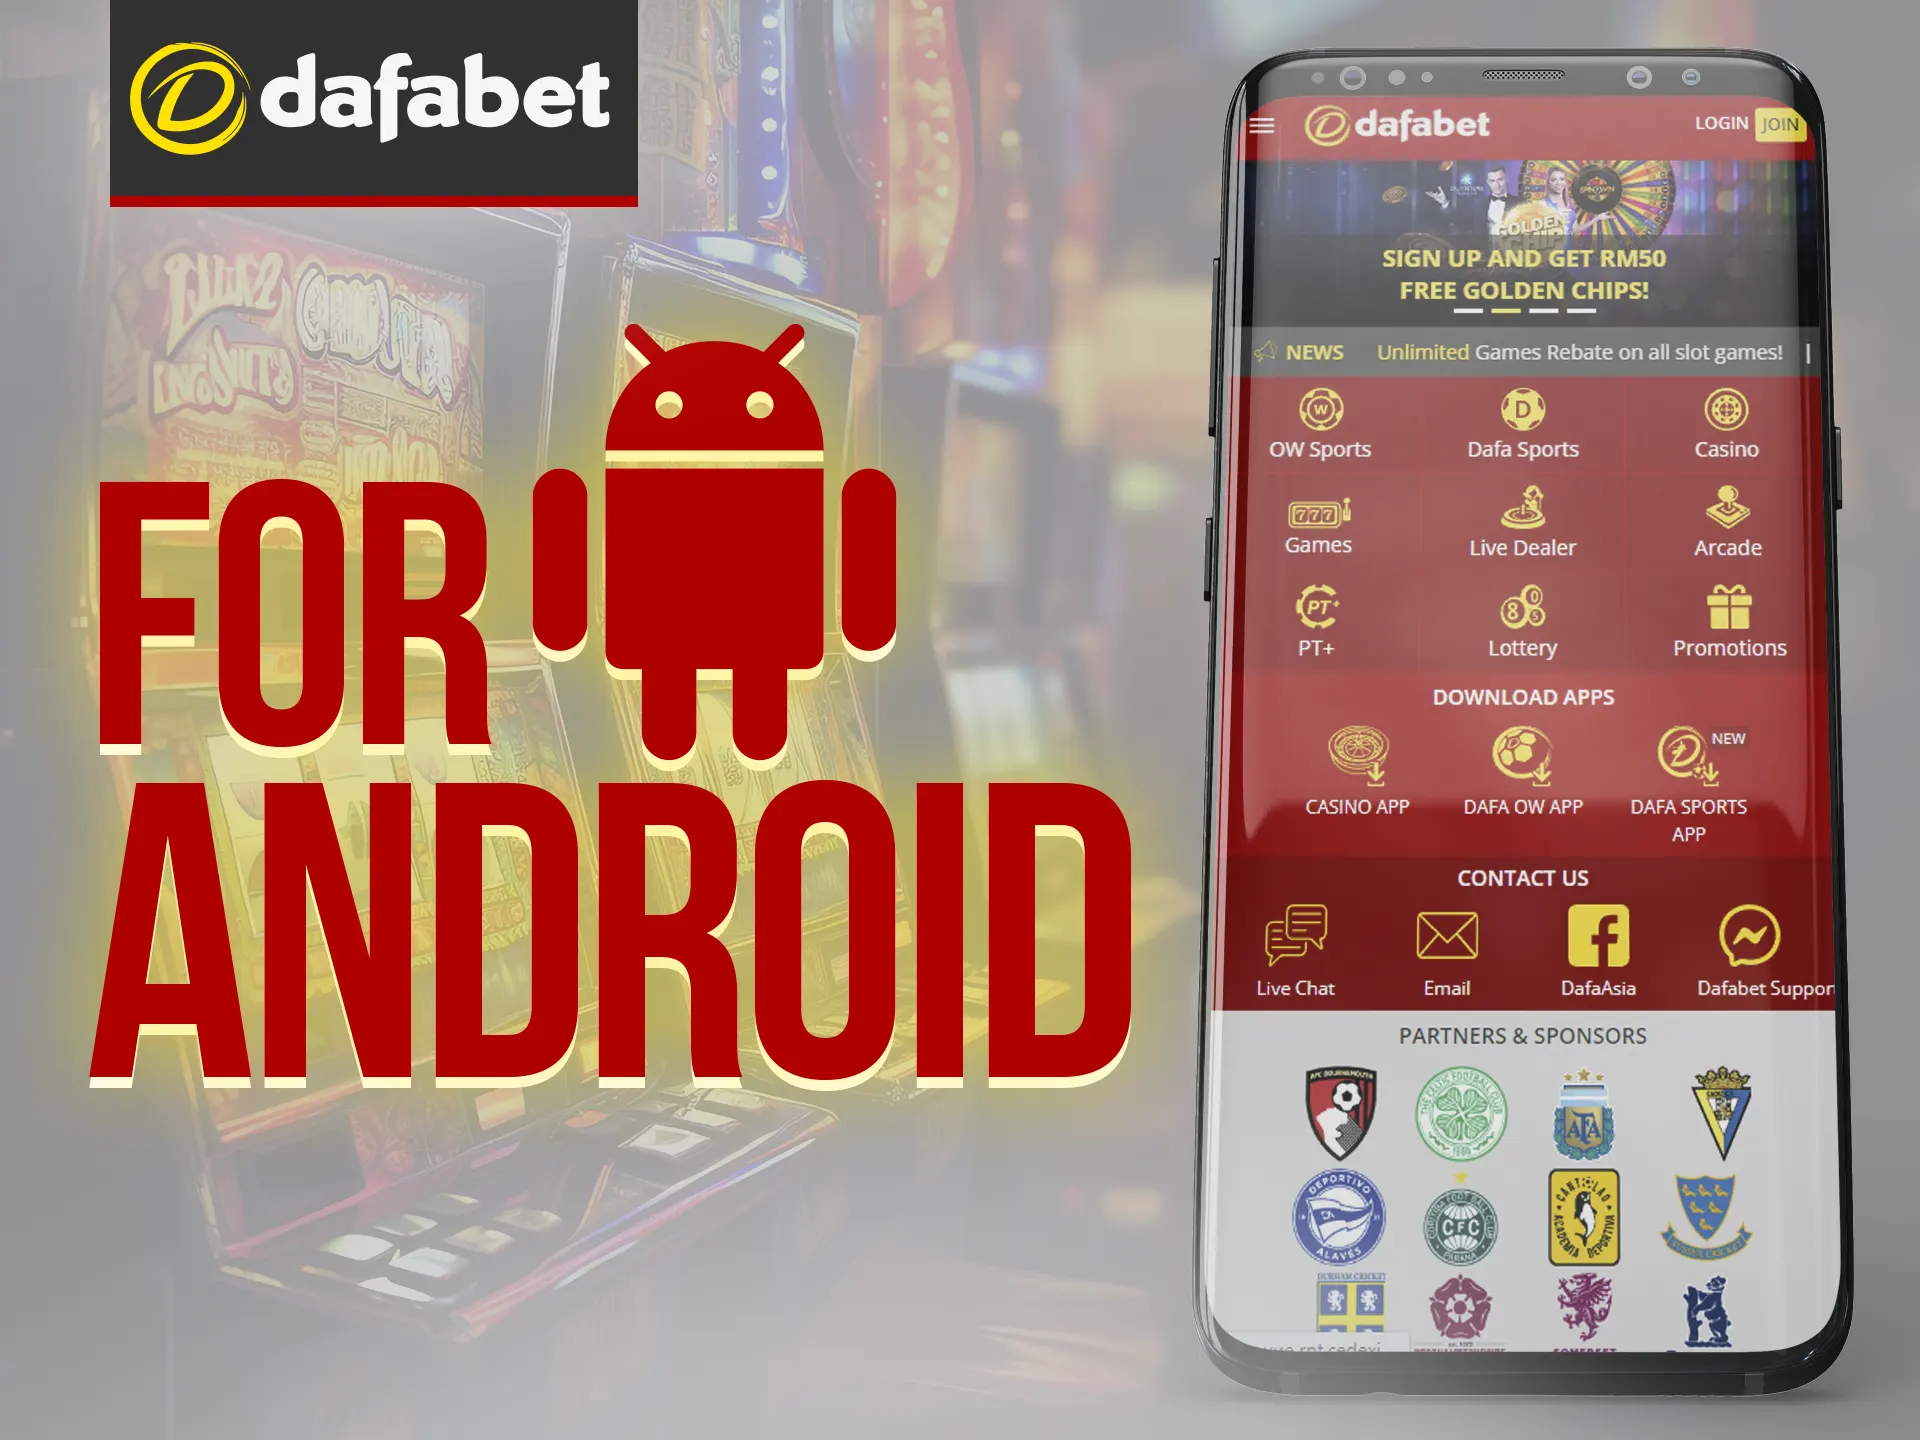 Dafabet app for Android: Bet on slots and live dealers with stability and privacy.